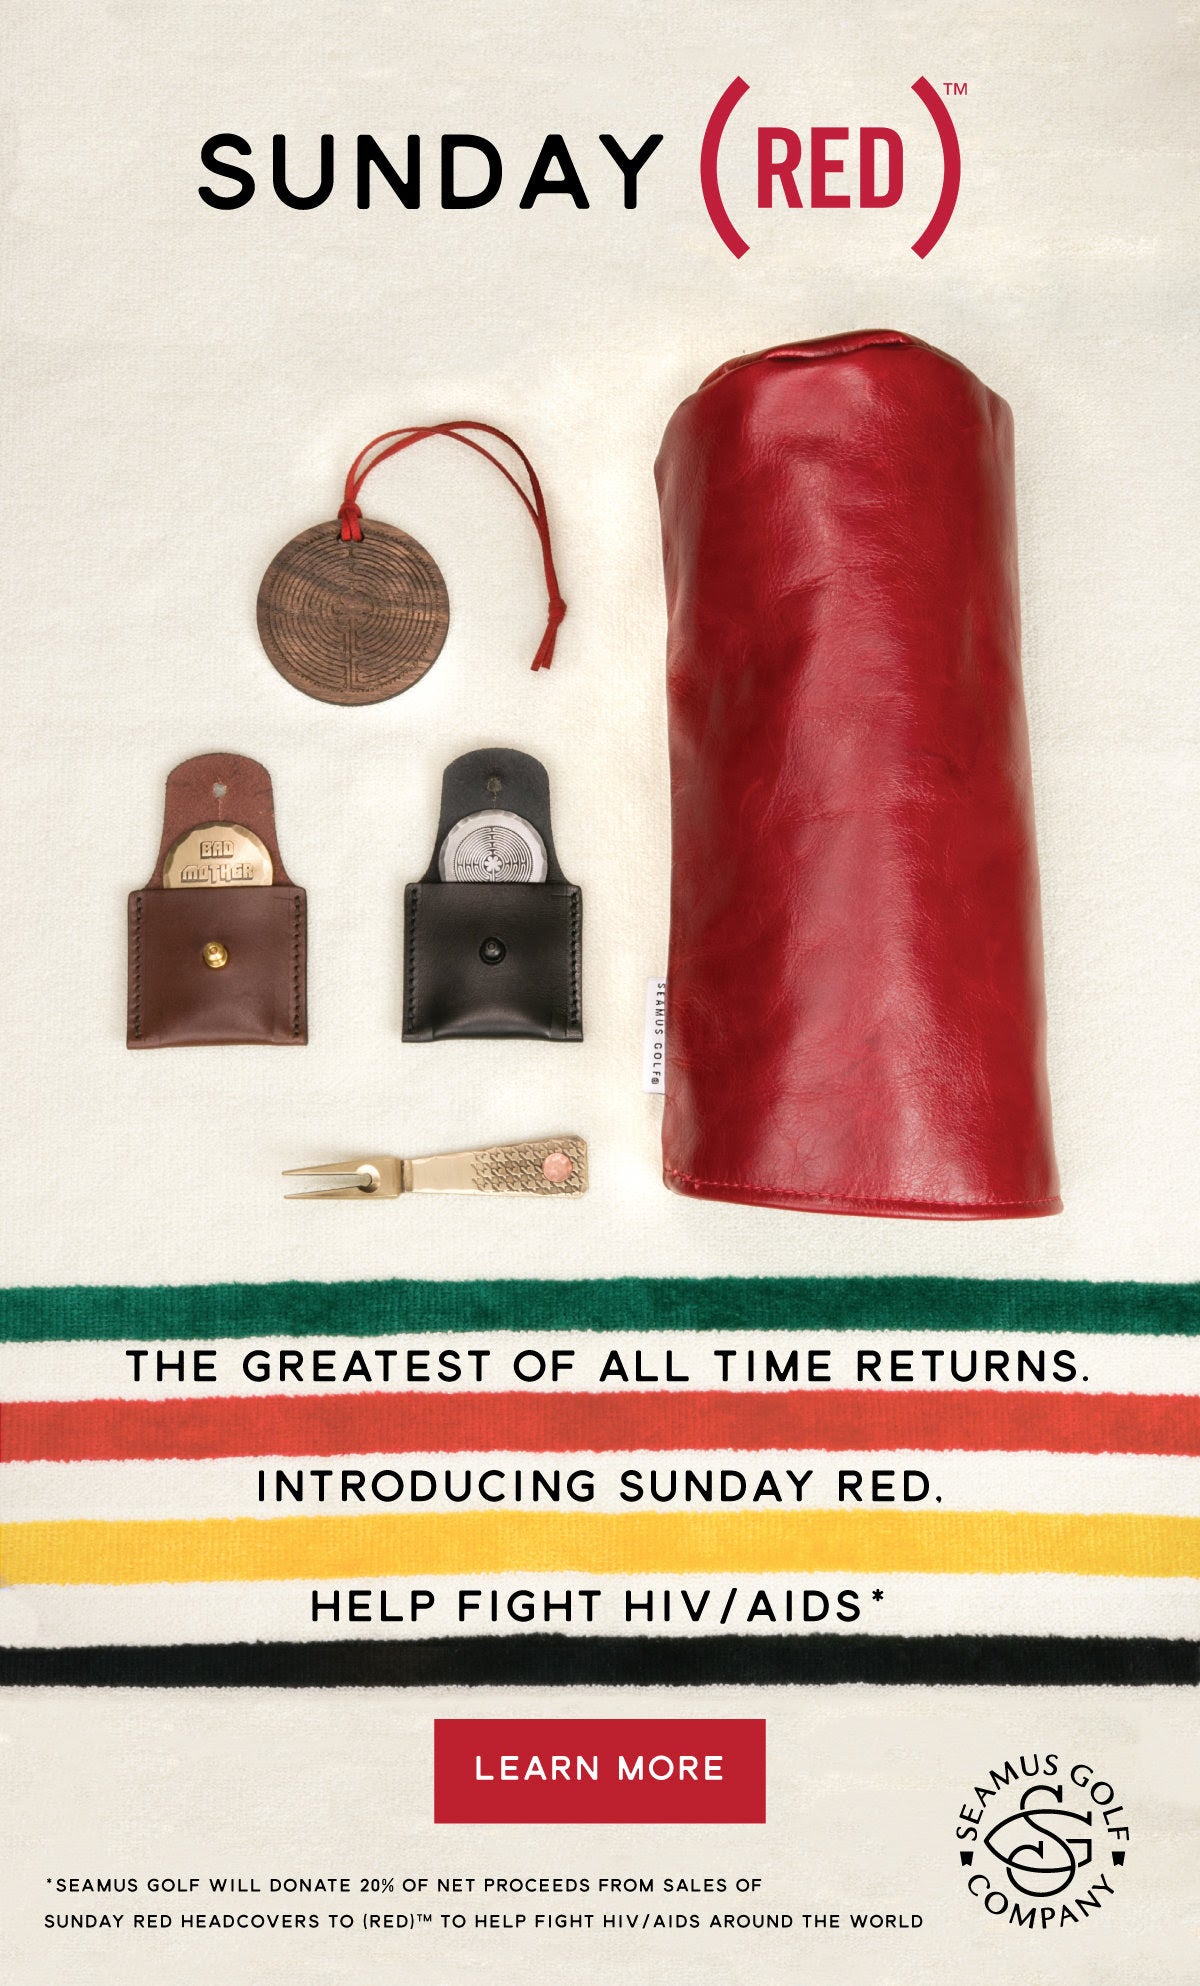 Celebrating the return of the greatest there ever was to the game, we are introducing the limited edition Sunday Red cover. A shell of high-quality leather similar to a collectible Chesterfield couch in a lush red, each cover is individually stitched with matching thread in Oregon, USA.  The lining is black fleece and the cover also features an exclusive white SEAMUS GOLF tag.  *SEAMUS GOLF will donate 20% of net proceeds from sales of the SUNDAY (RED) cover to RED.ORG, to help fight HIV / AIDS around the world.